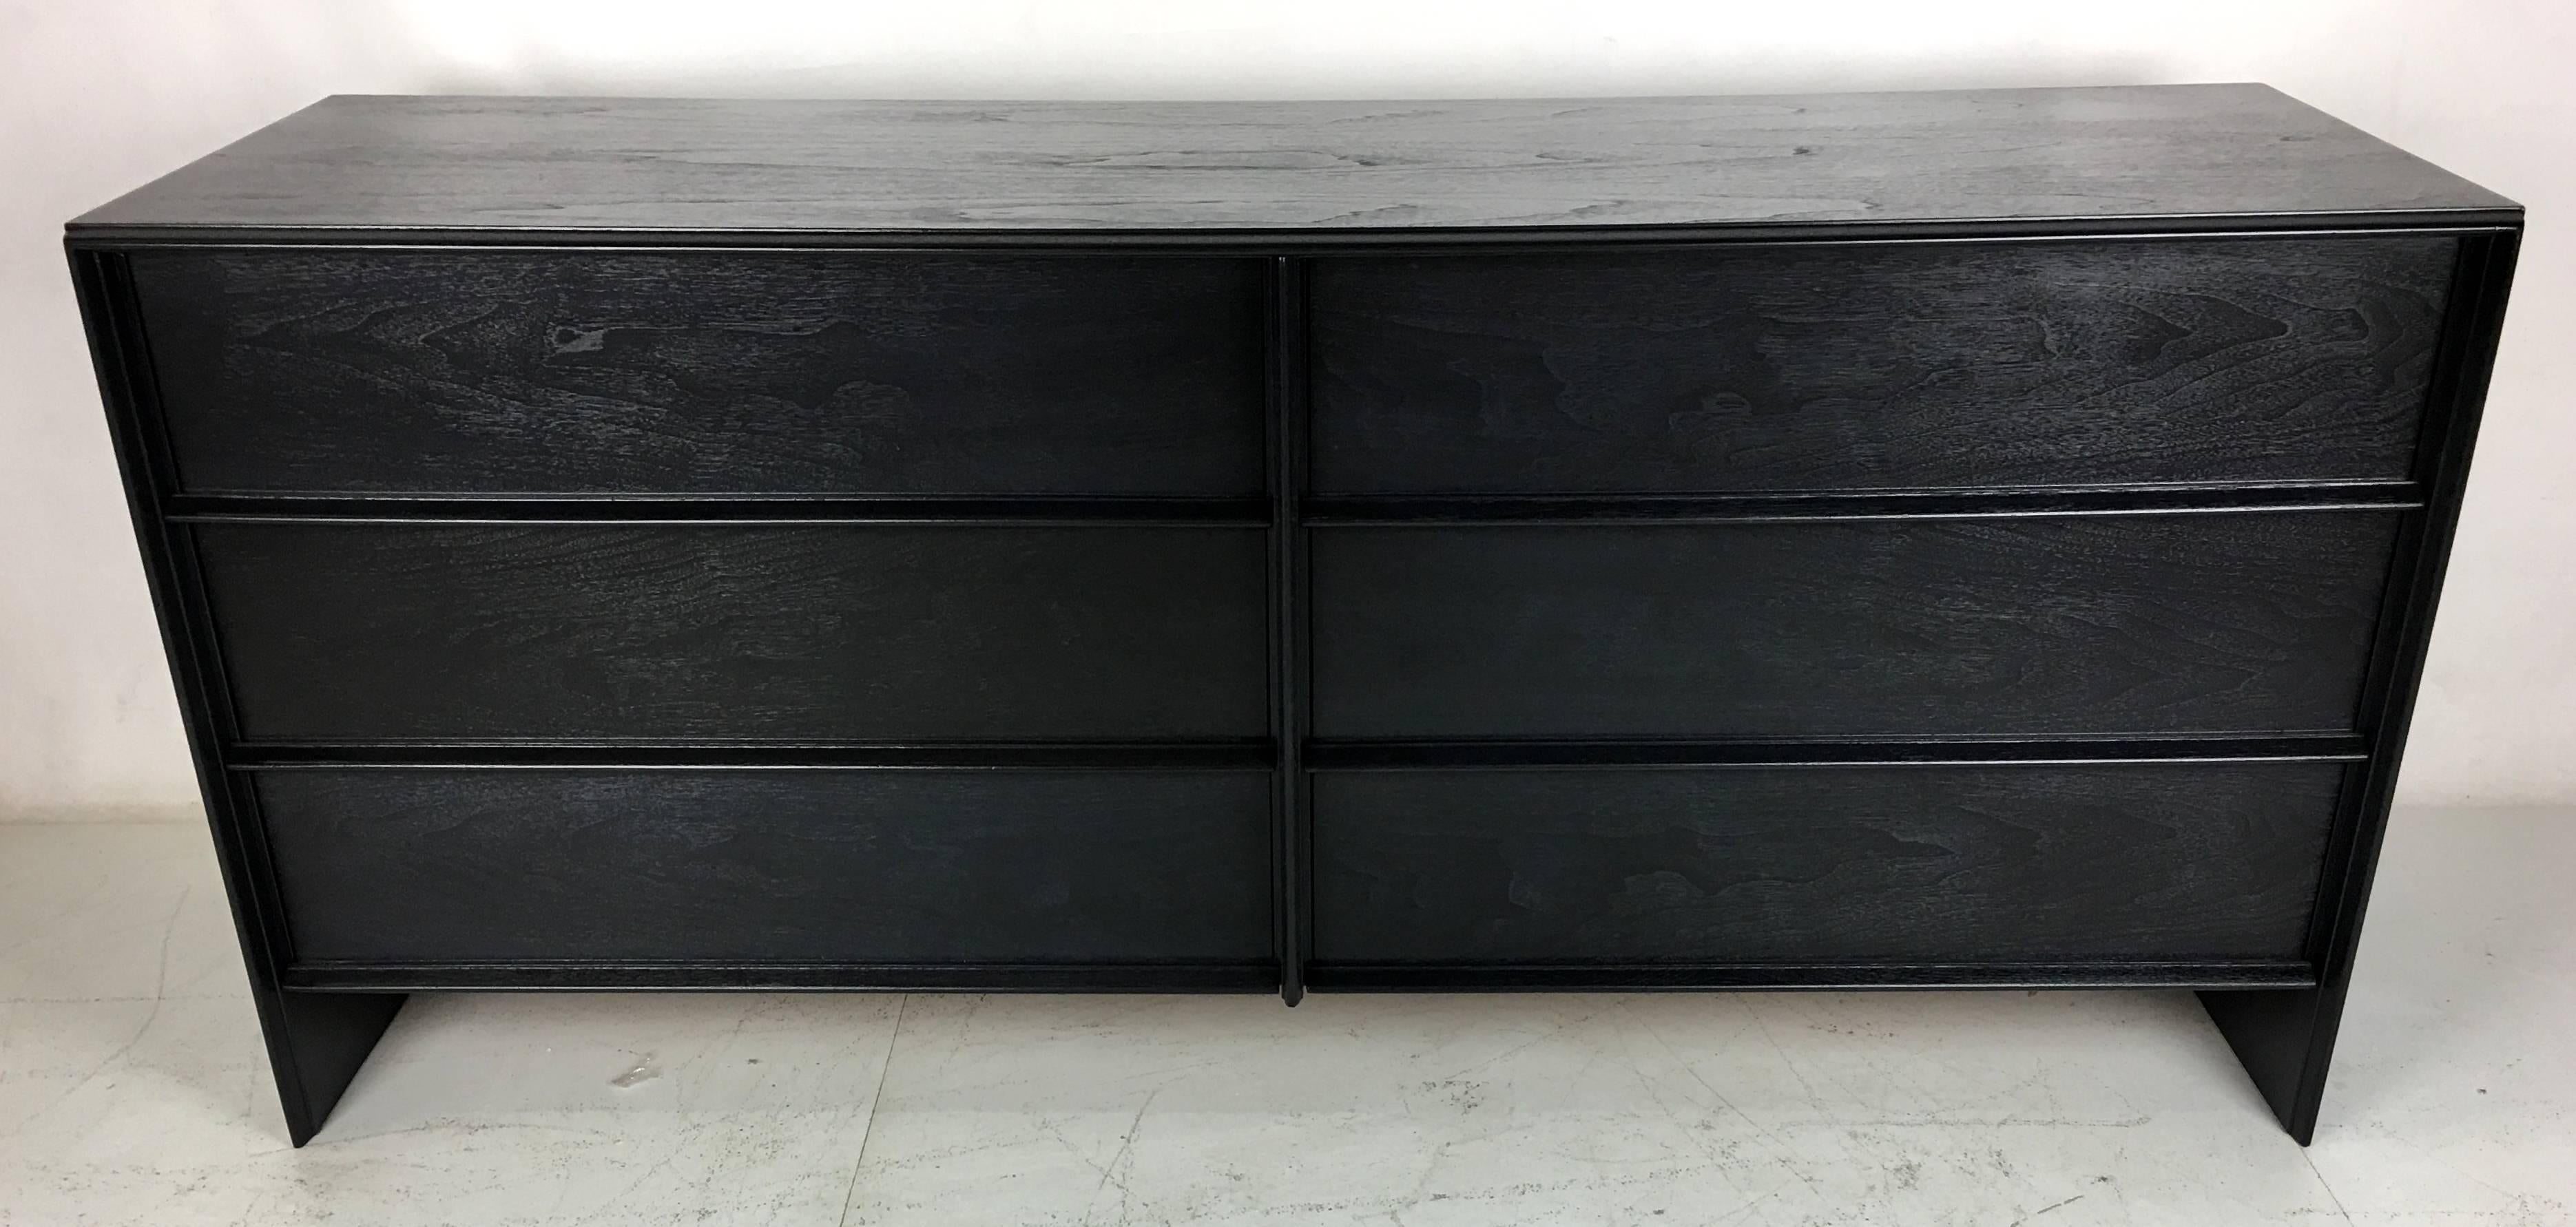 A beautiful example of this classic Modern Thinline Dresser by T.H. Robsjohn-Gibbings for Widdicomb refinished in a deep charcoal grey lacquer. We've worked on this color for a long time and we finally got it just right. It's a chic update for this